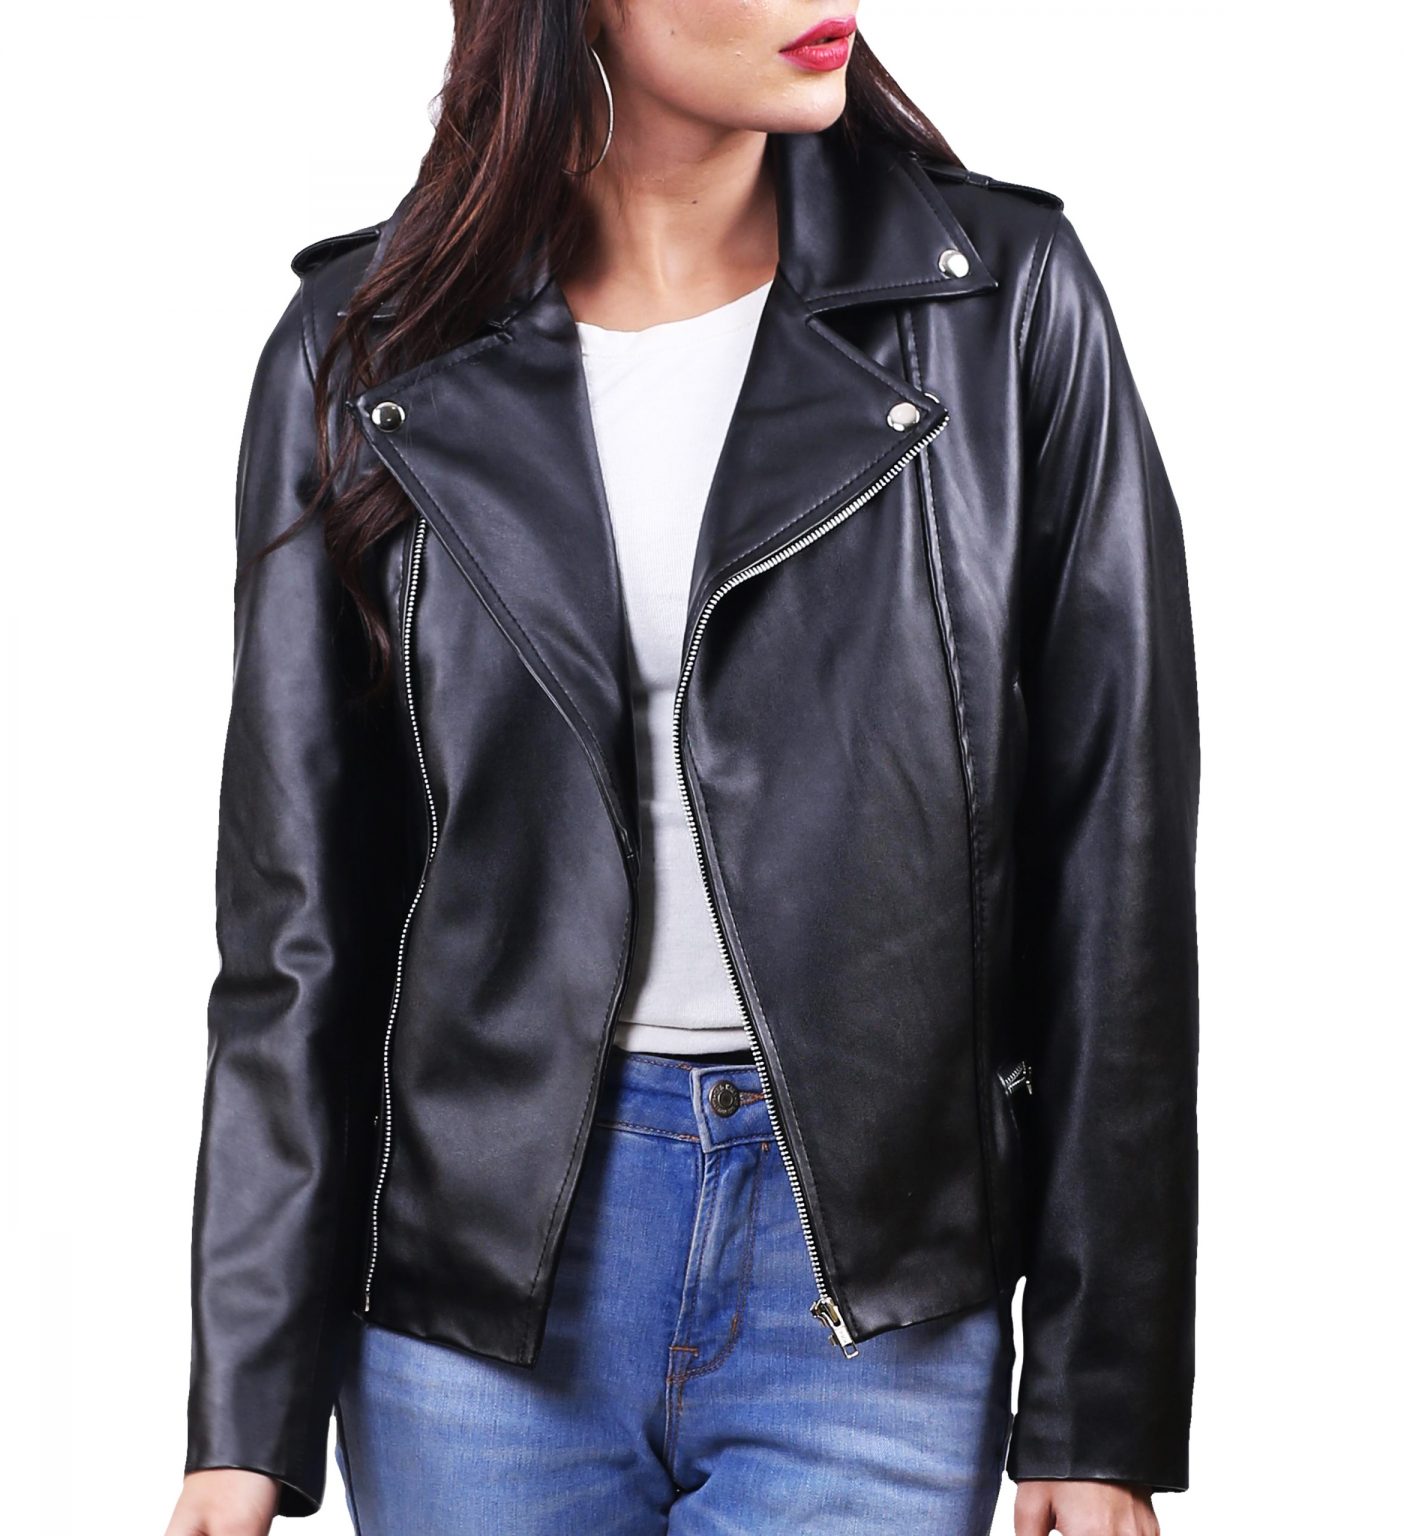 Southside Serpents Riverdale Leather Jacket | Celebs Outfits